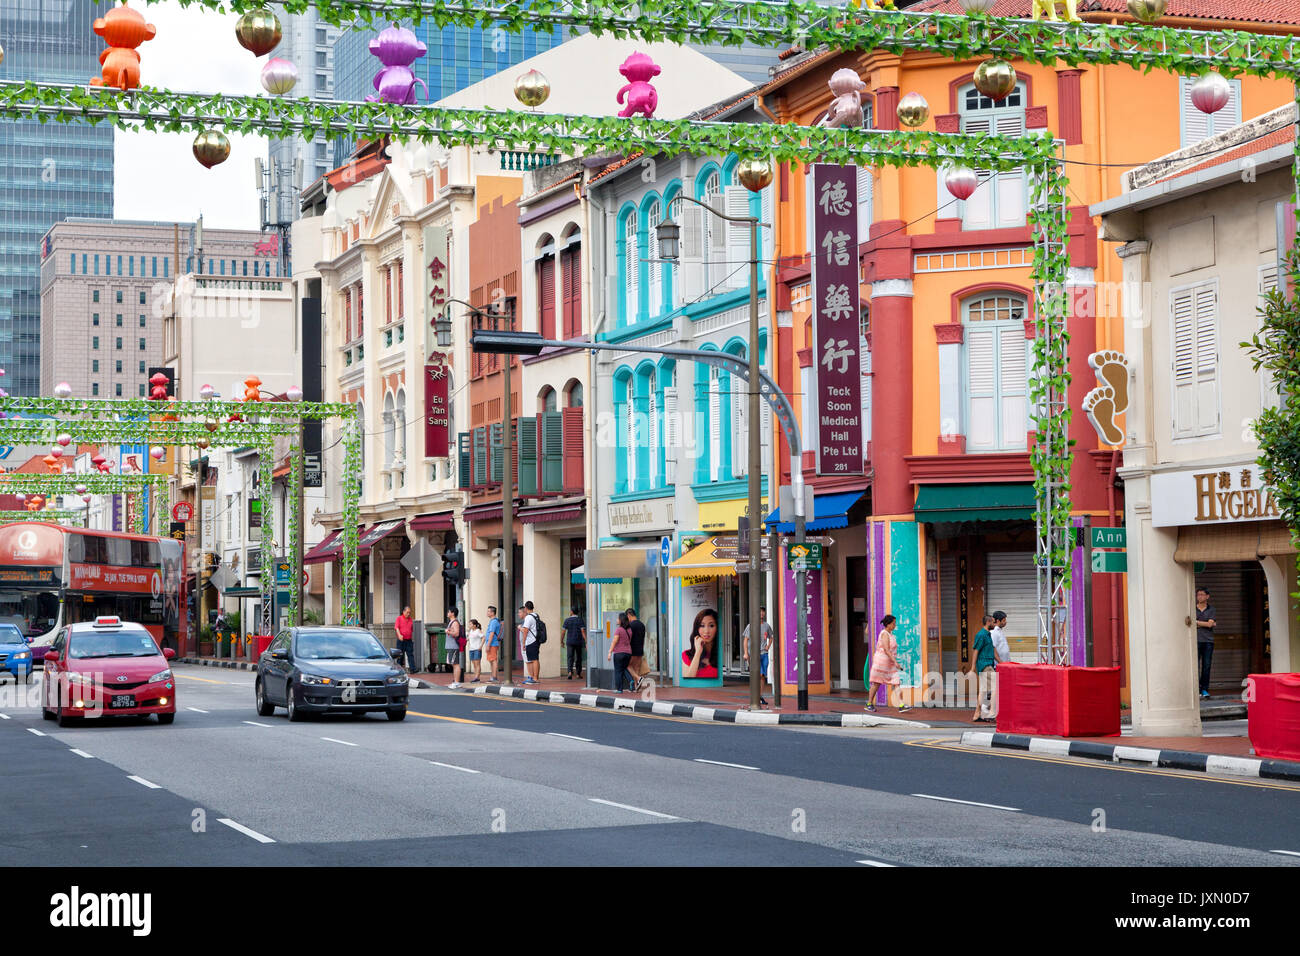 Singapore - February 21, 2016 : colorful buildings along a street in Chinatown district Stock Photo